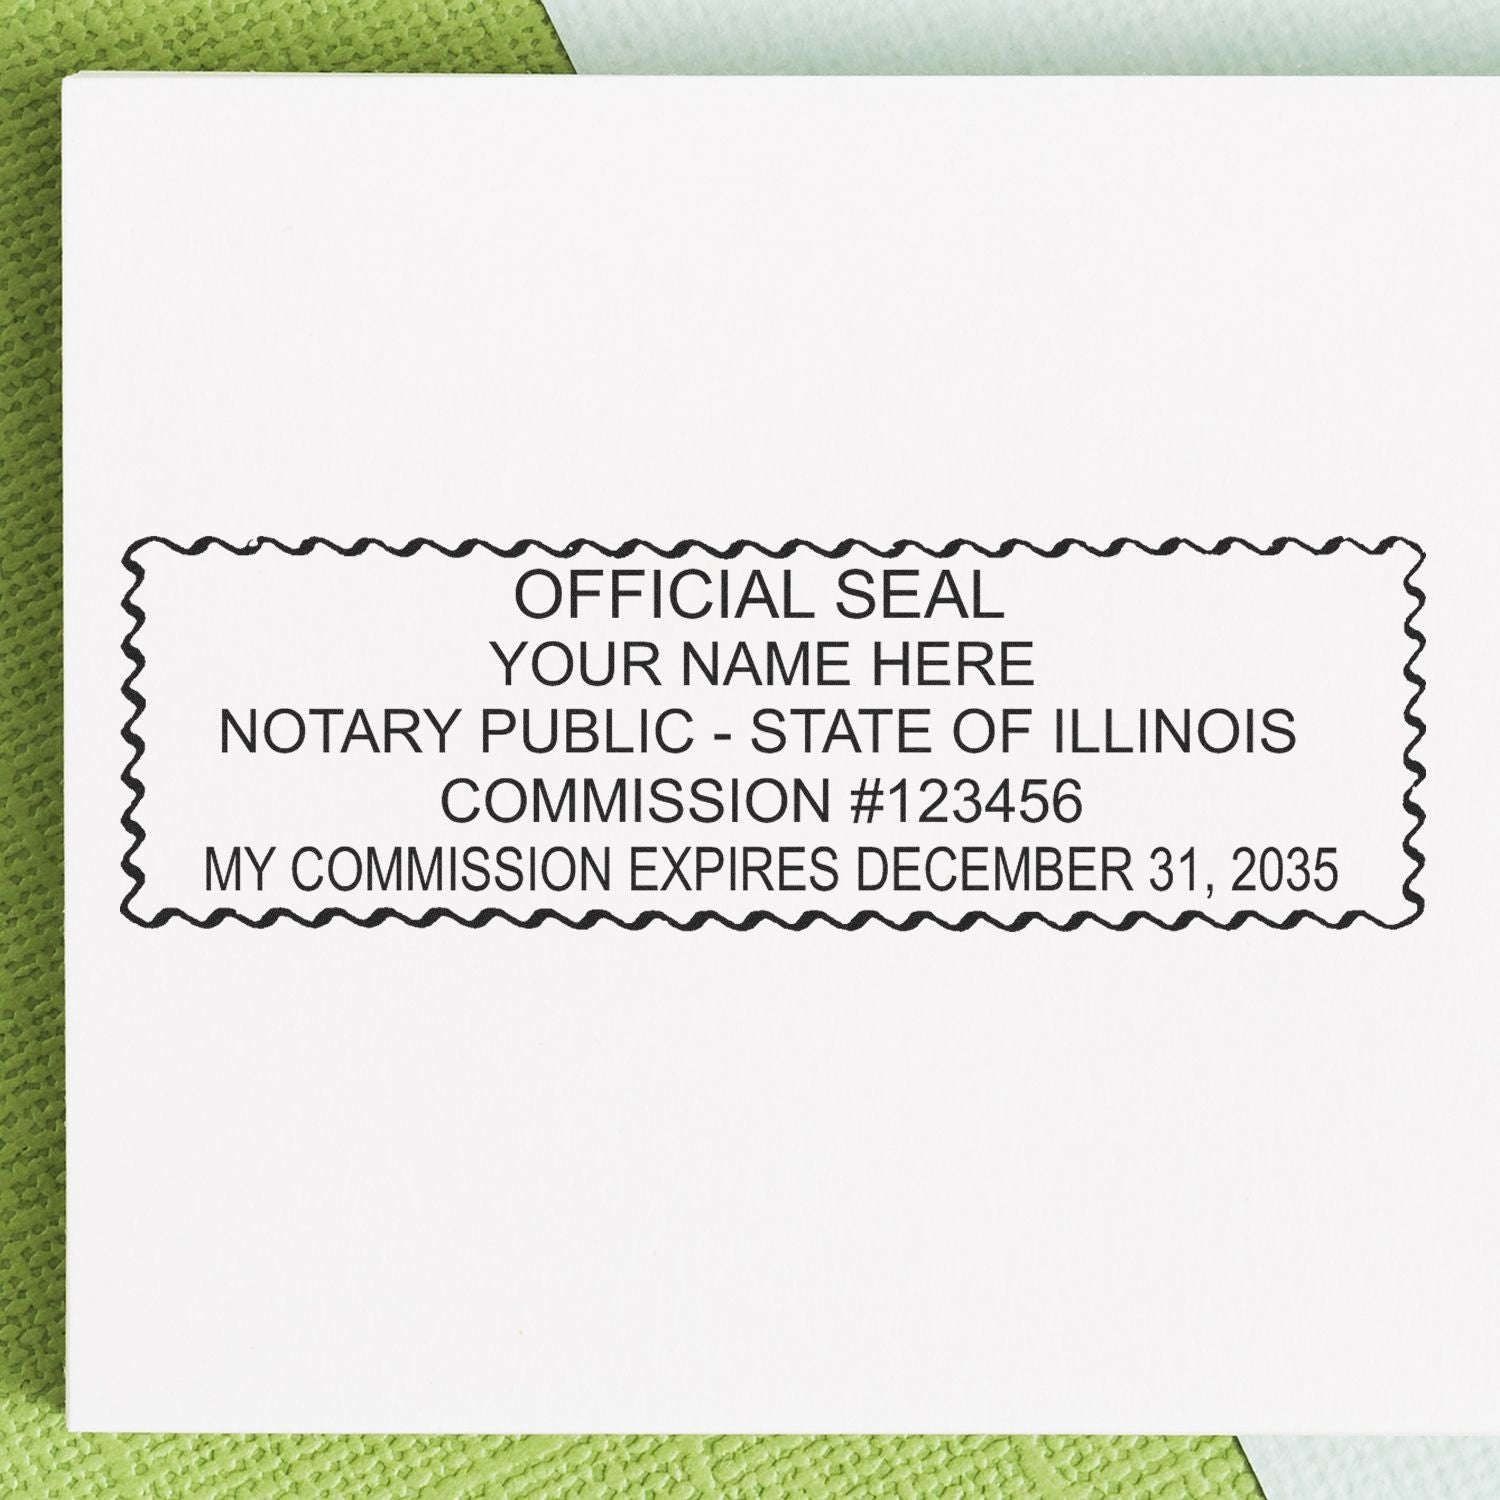 An alternative view of the Super Slim Illinois Notary Public Stamp stamped on a sheet of paper showing the image in use